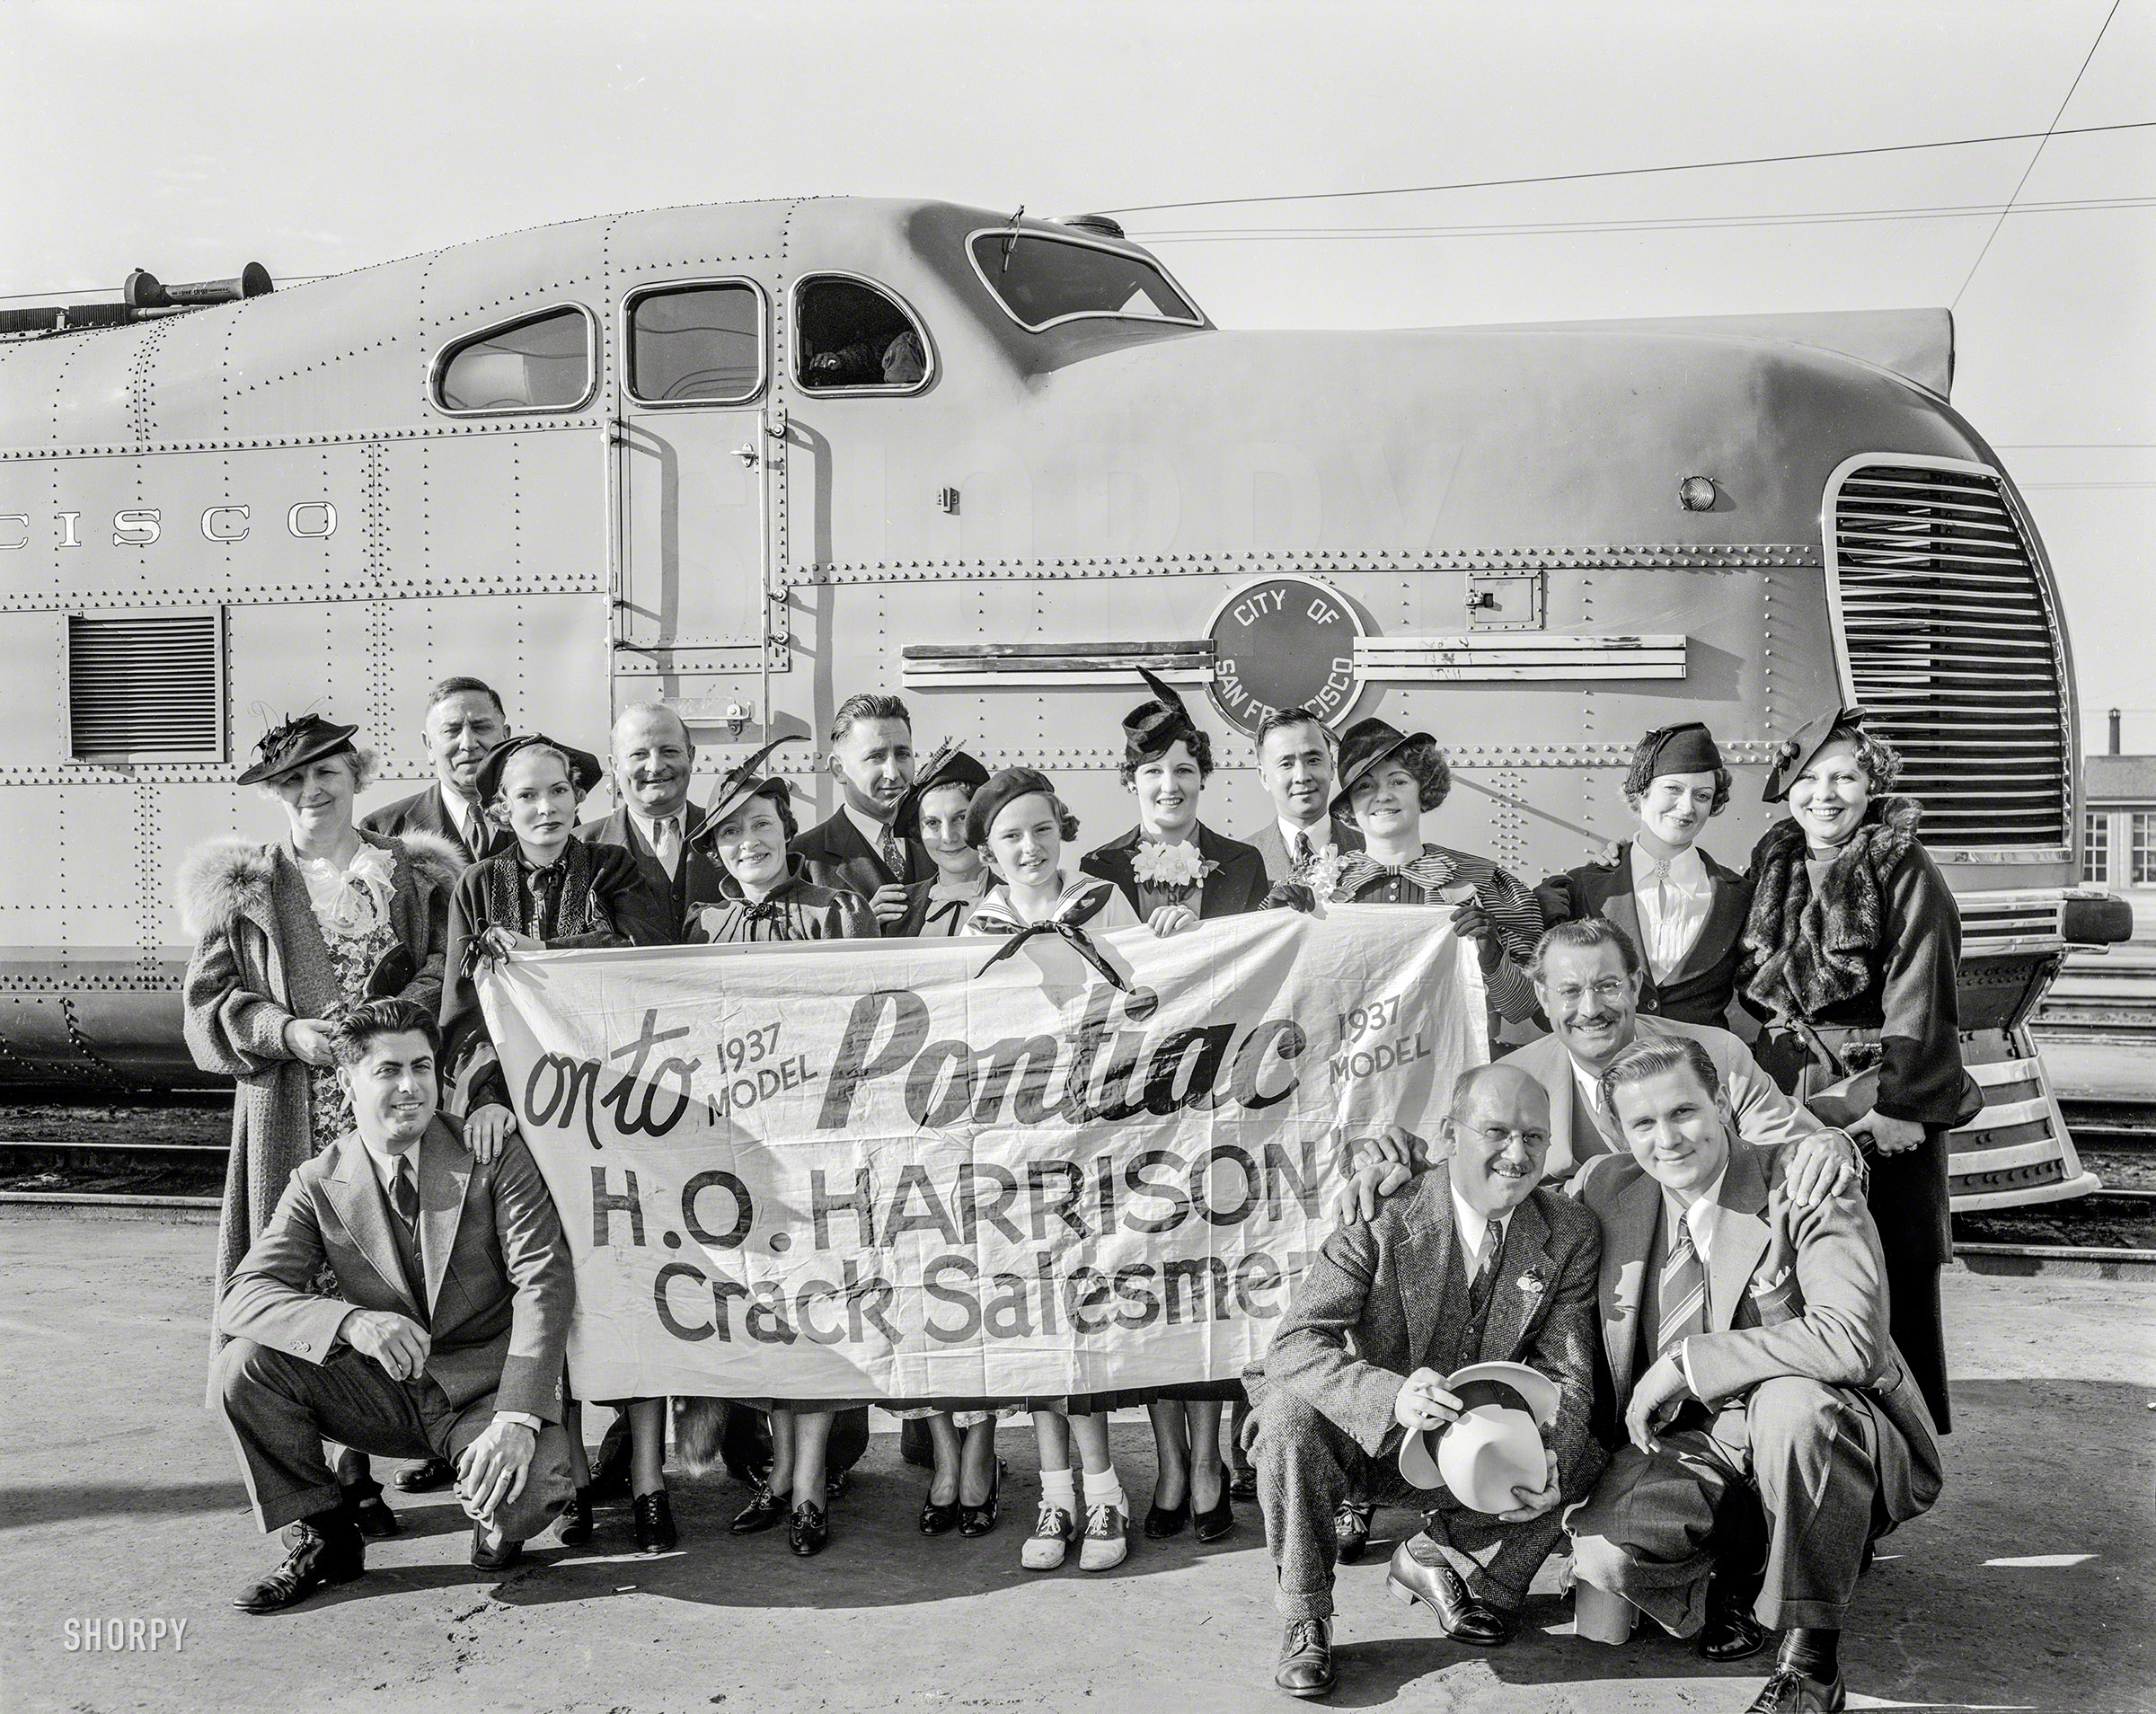 Oct. 8, 1936. "H.O. Harrison Pontiac -- 'crack salesmen' and wives 'Going East' on streamliner City of San Francisco." 8x10 acetate negative. View full size.